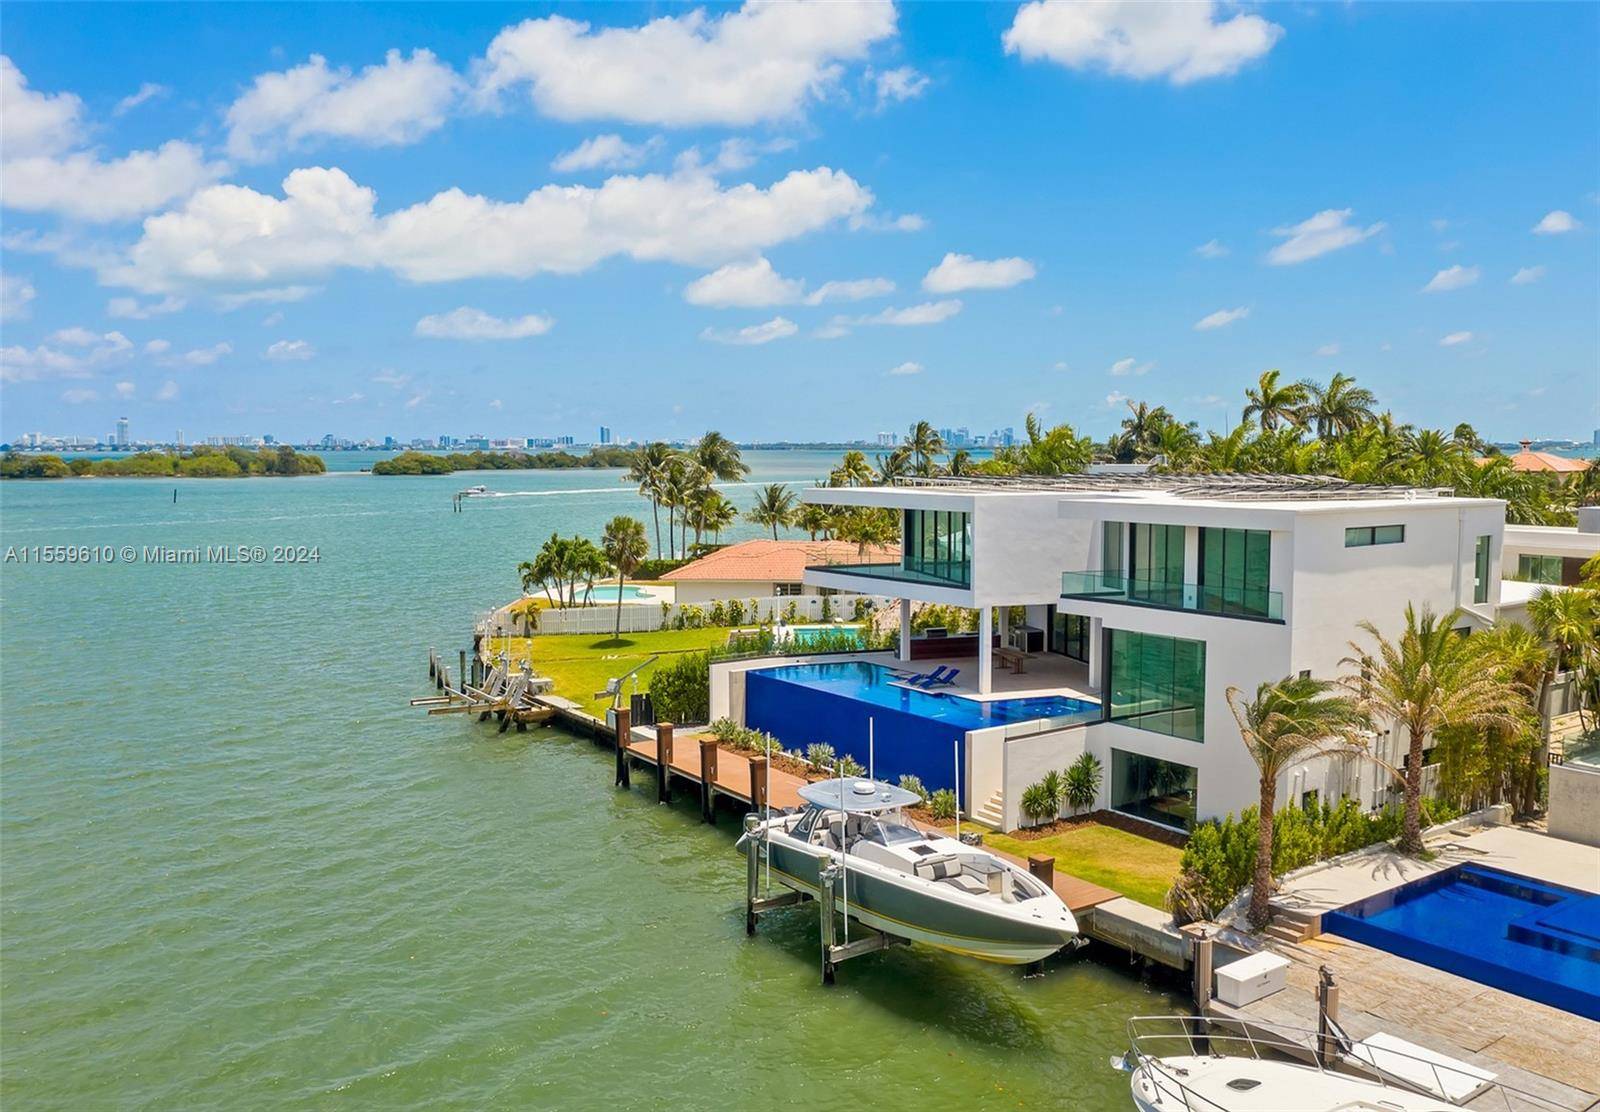 Stunning Bay Canal Contemporary Residence 100 ft on deep water New Construction total of 12, 200 SF under A C.